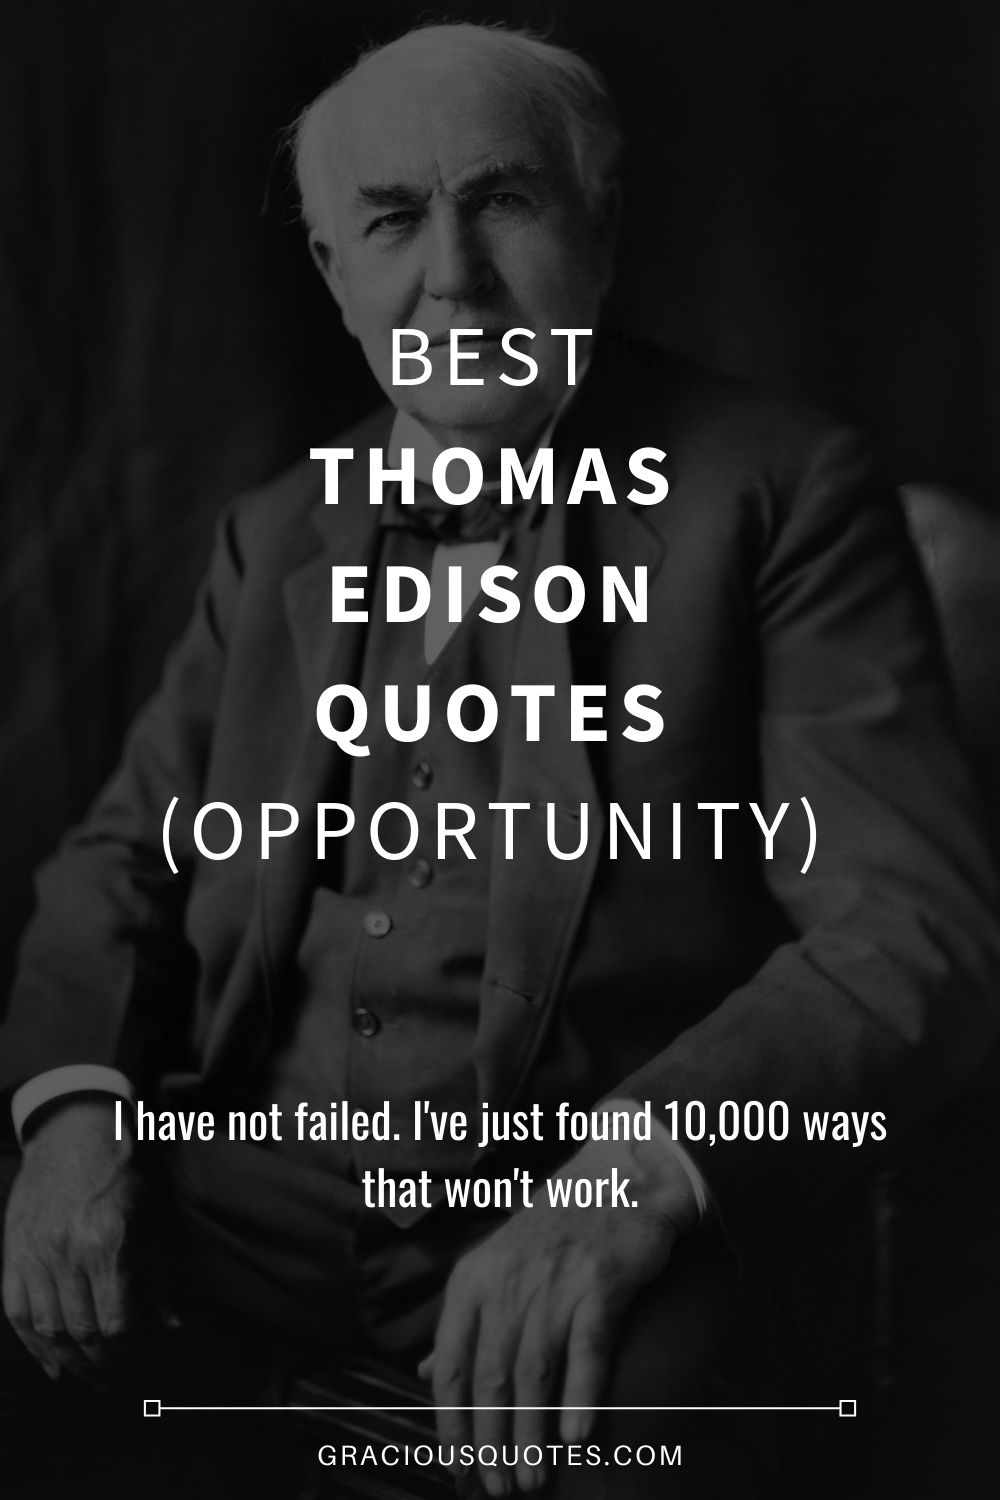 Best Thomas A. Edison Quotes (OPPORTUNITY) - Gracious Quotes